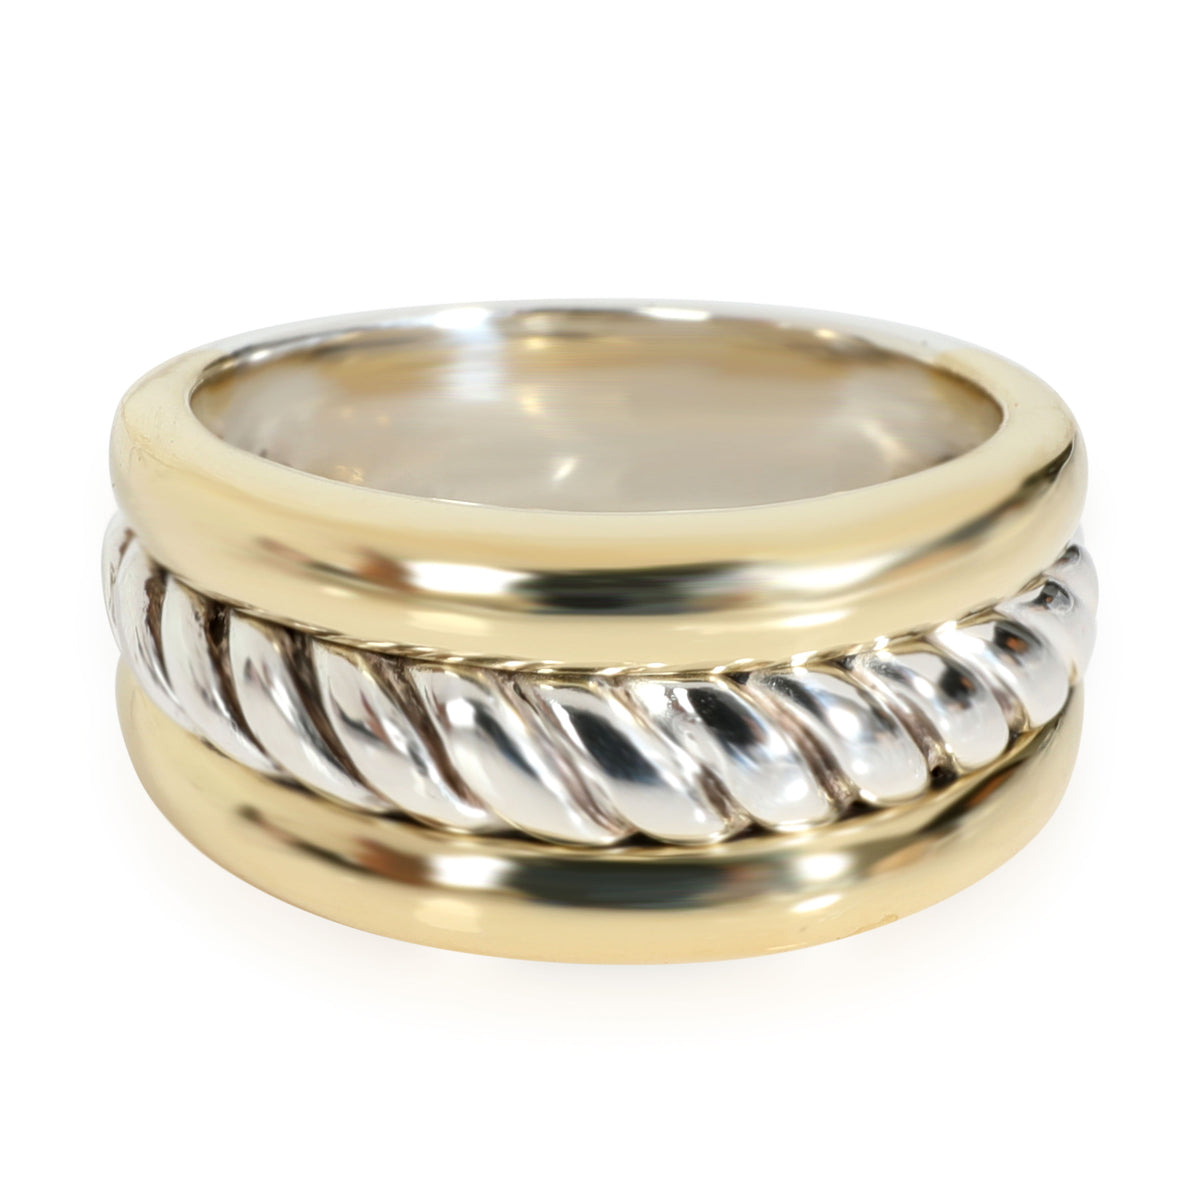 David Yurman Cable Ring in 18K Yellow Gold/Sterling Silver